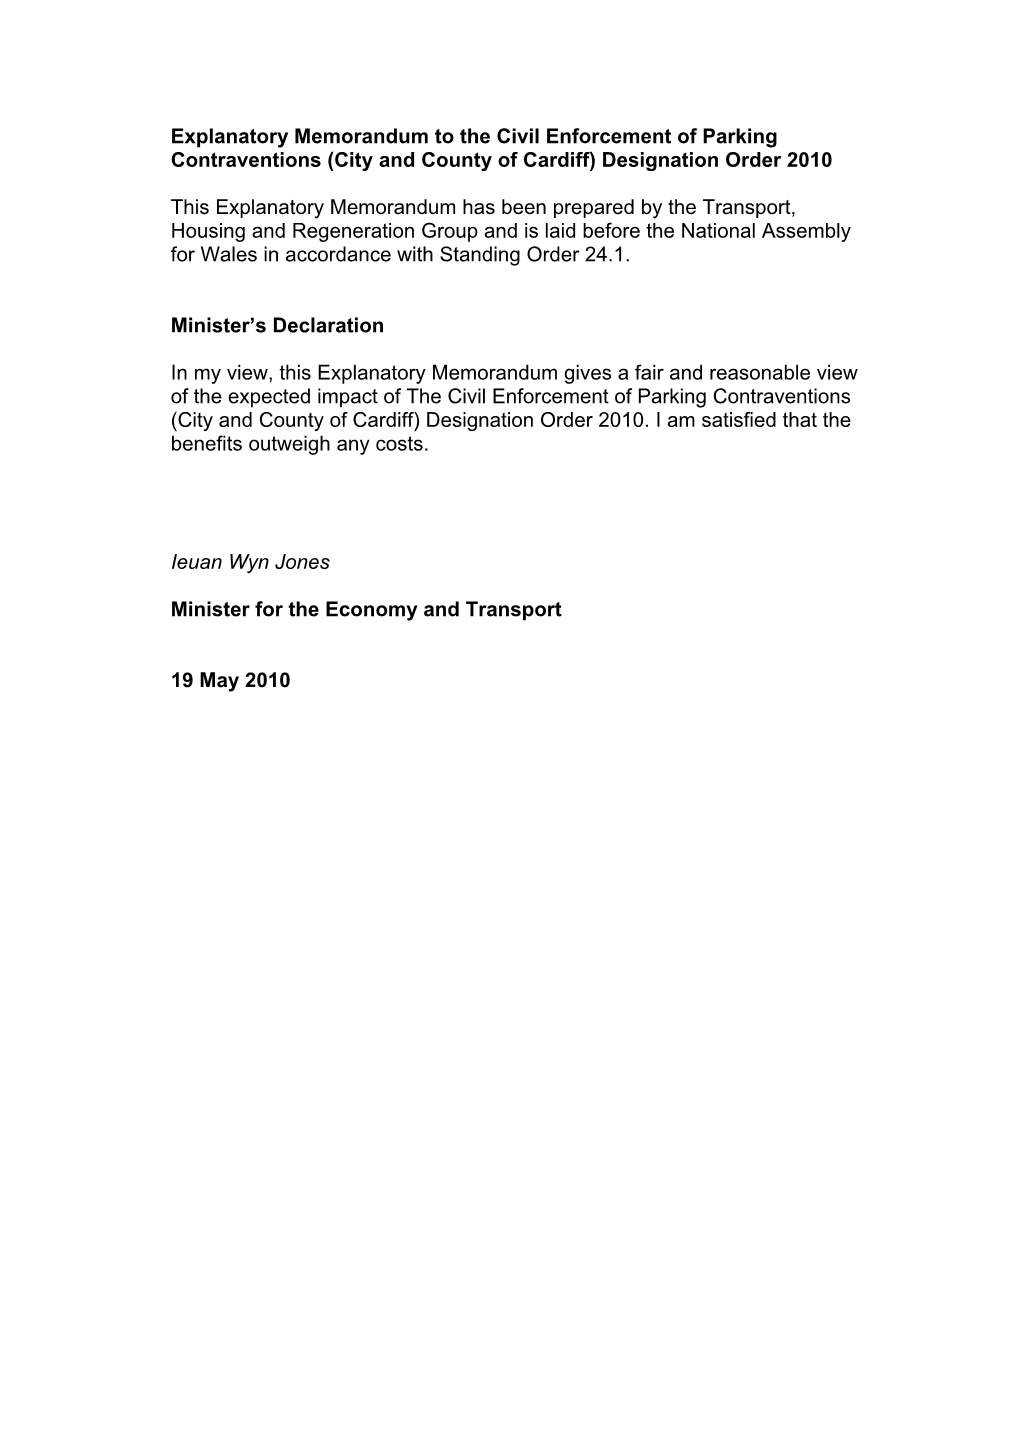 Explanatory Memorandum to the Civil Enforcement of Parking Contraventions (City and County of Cardiff) Designation Order 2010